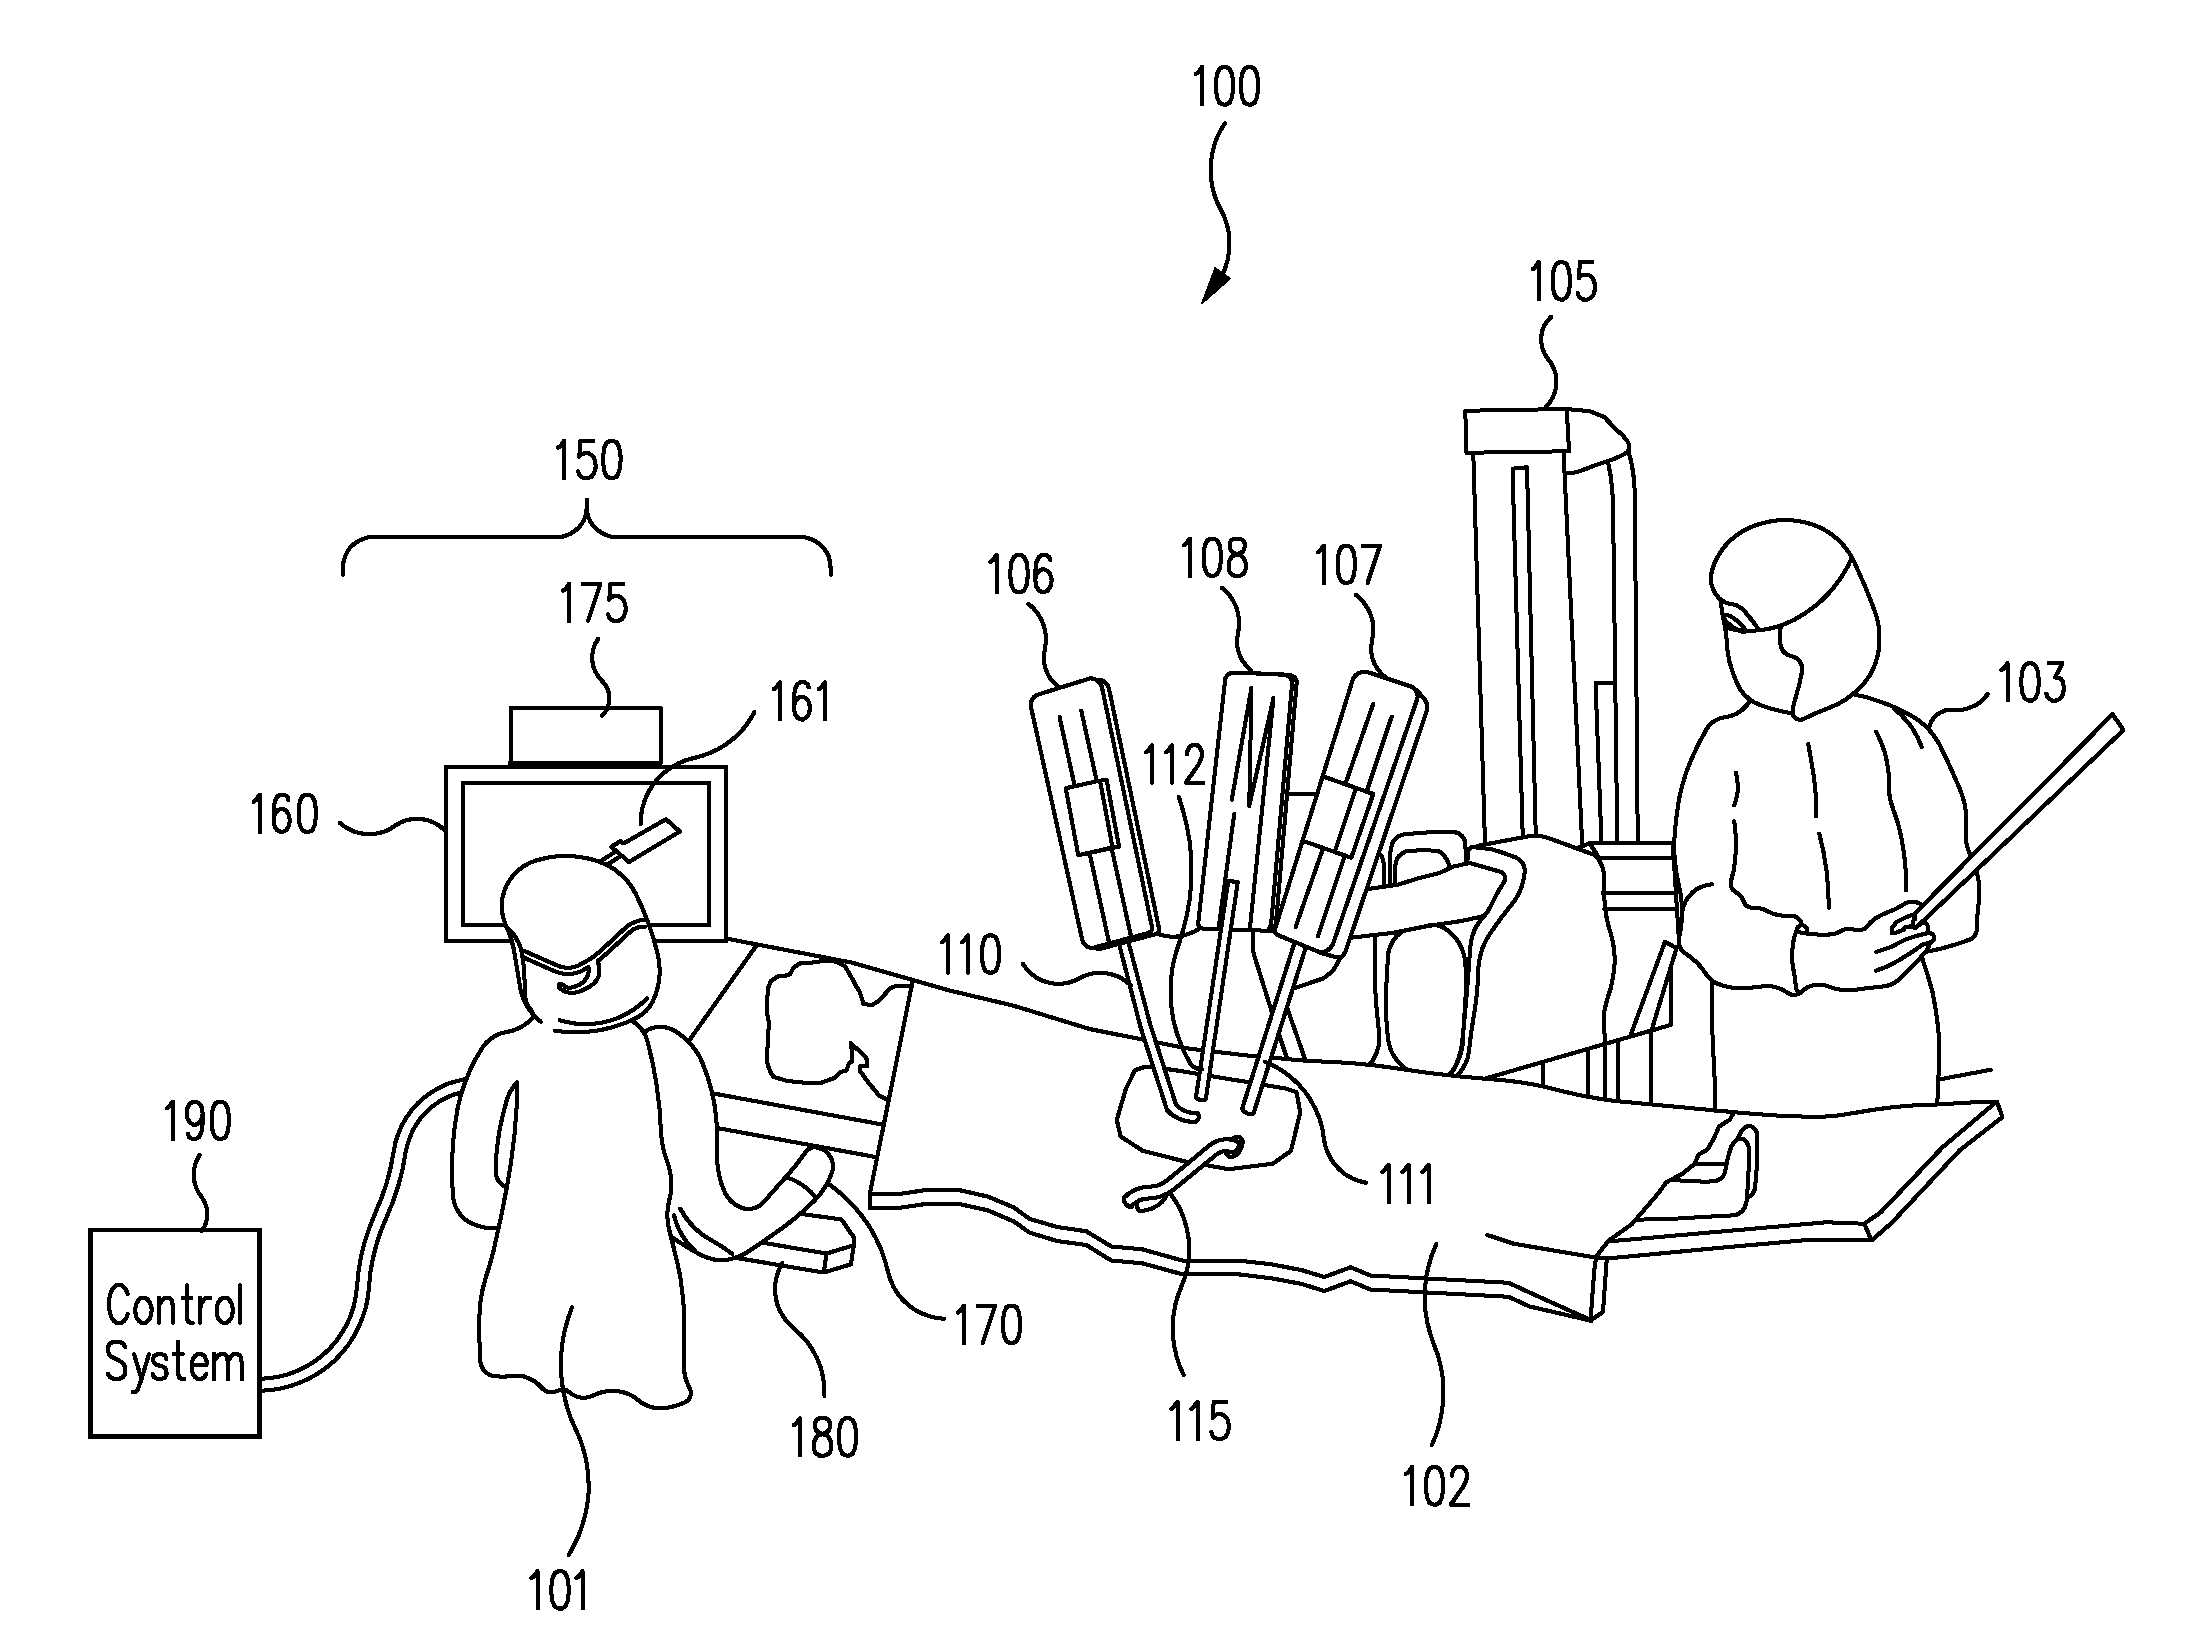 Patient-side surgeon interface for a minimally invasive, teleoperated surgical instrument